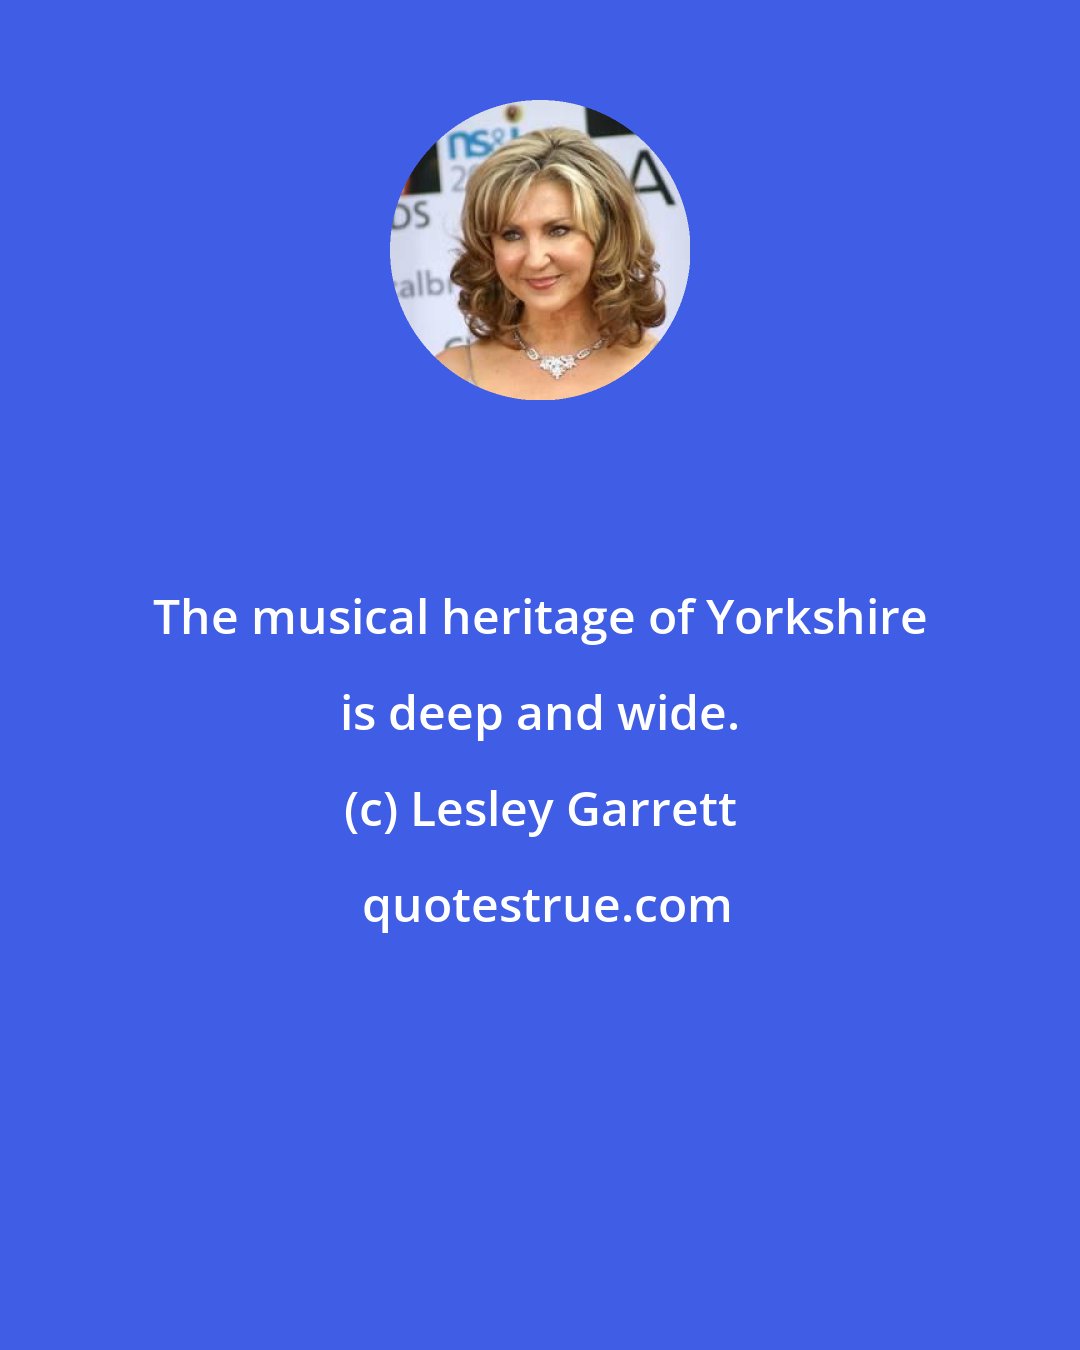 Lesley Garrett: The musical heritage of Yorkshire is deep and wide.